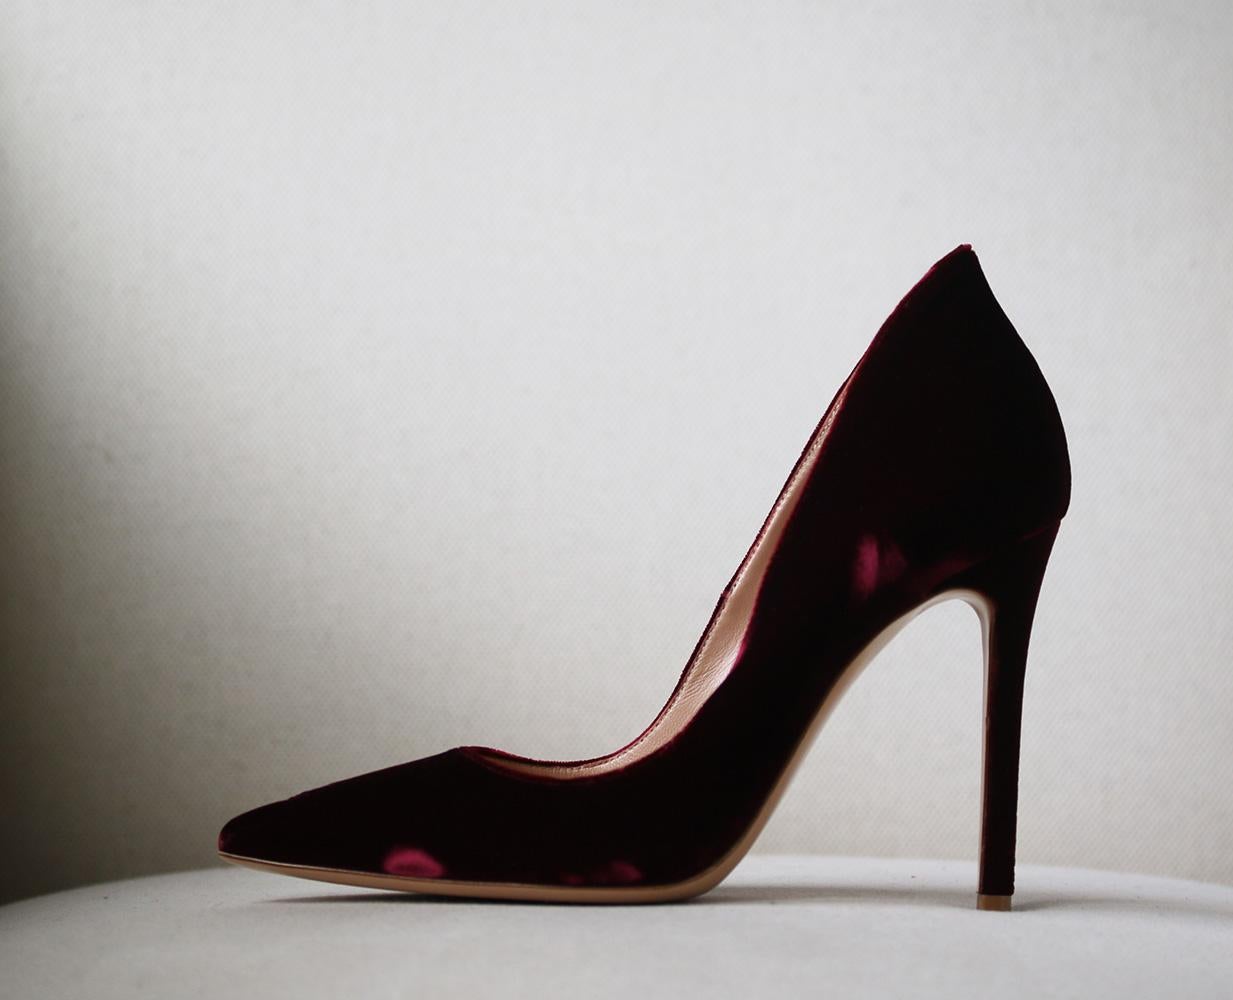 Italian label Gianvito Rossi is world-renowned for timelessly elegant designs. These pumps are an exquisite example, expertly crafted and hand-finished from plush velvet in a rich burgundy hue. The pin-thin heel and pointed silhouette have a